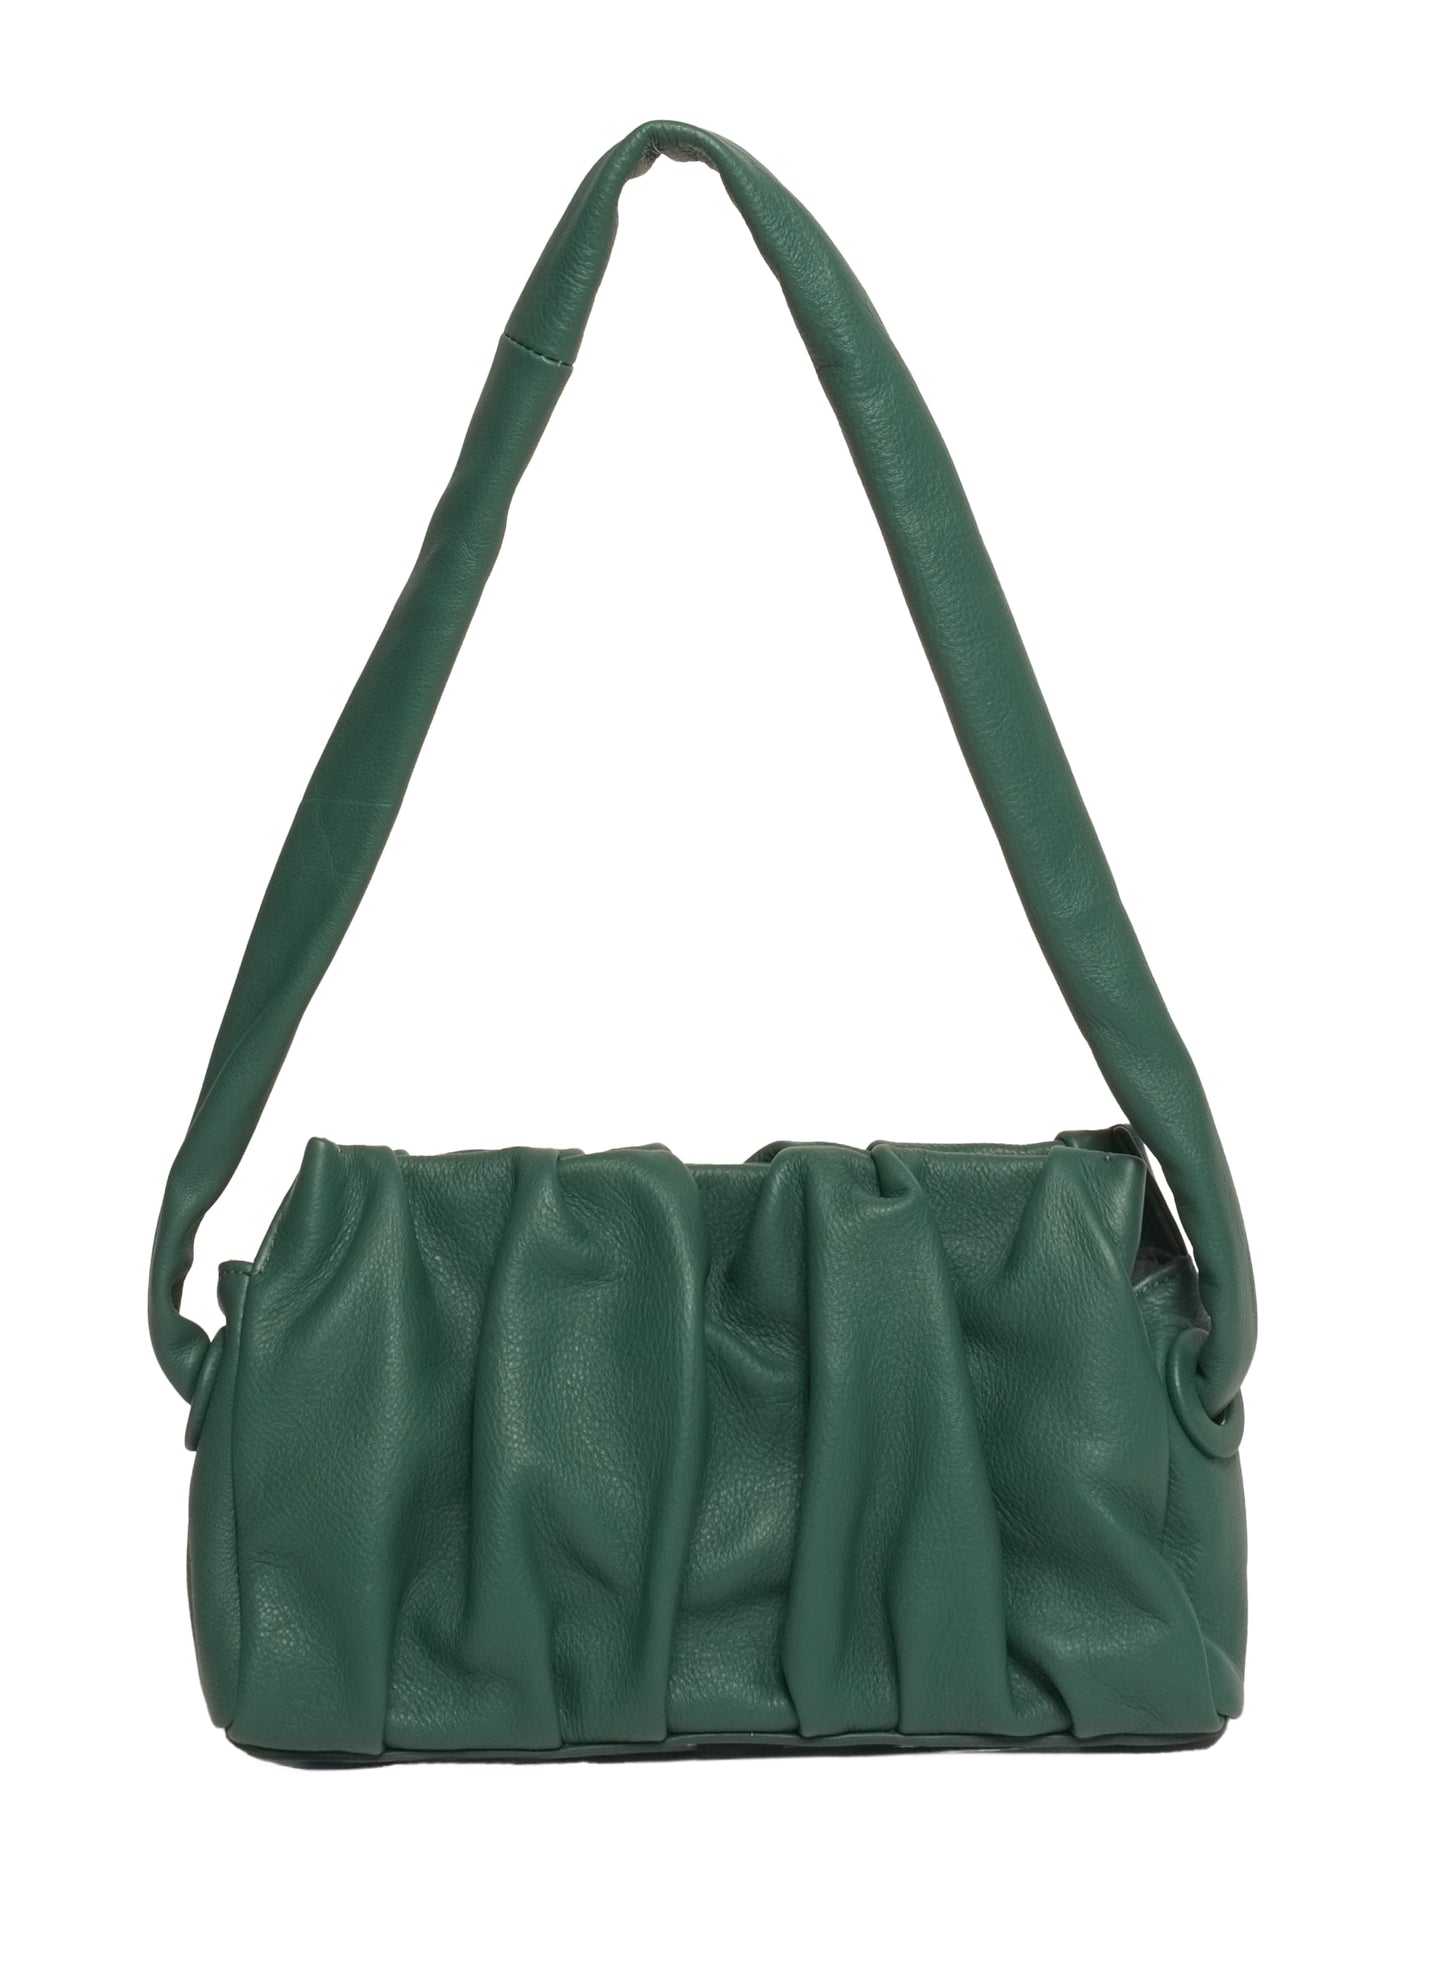 Vague Pebbled Leather Forest Green